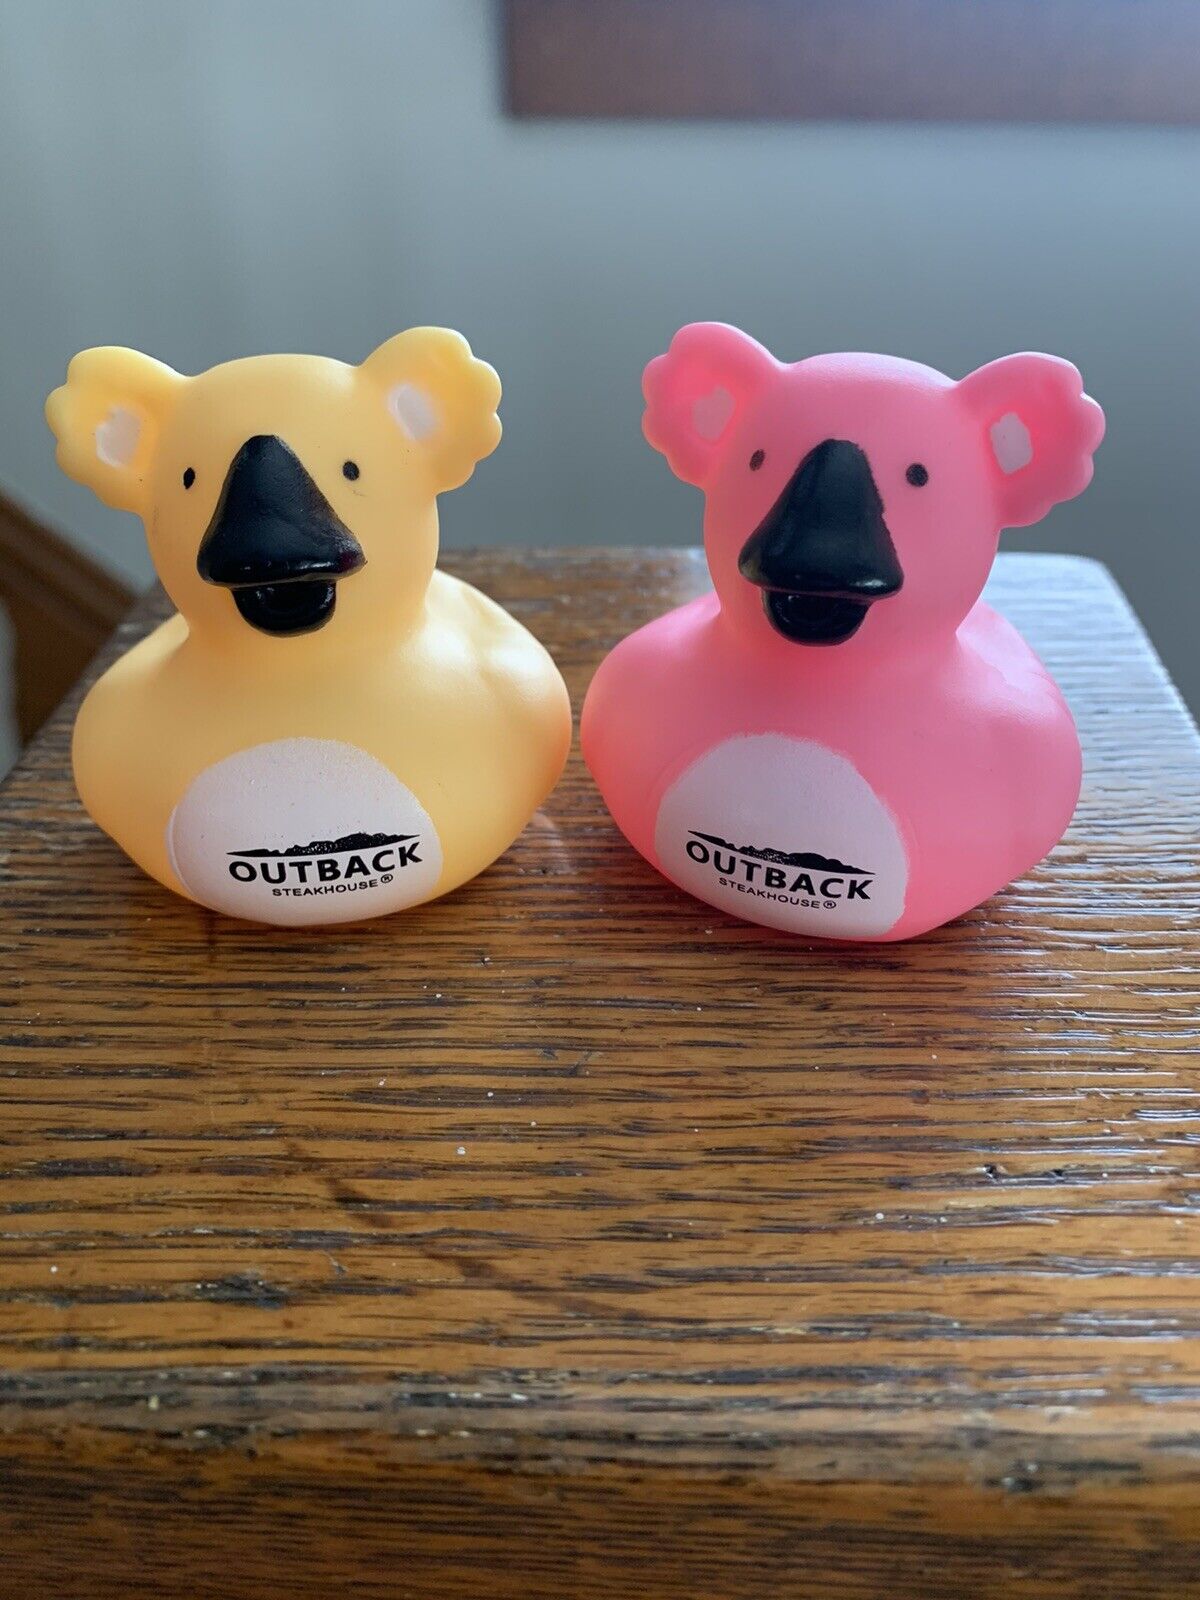 Limited Edition Set 2” Outback Steakhouse Exclusive Koala Bear Rubber Ducks “New